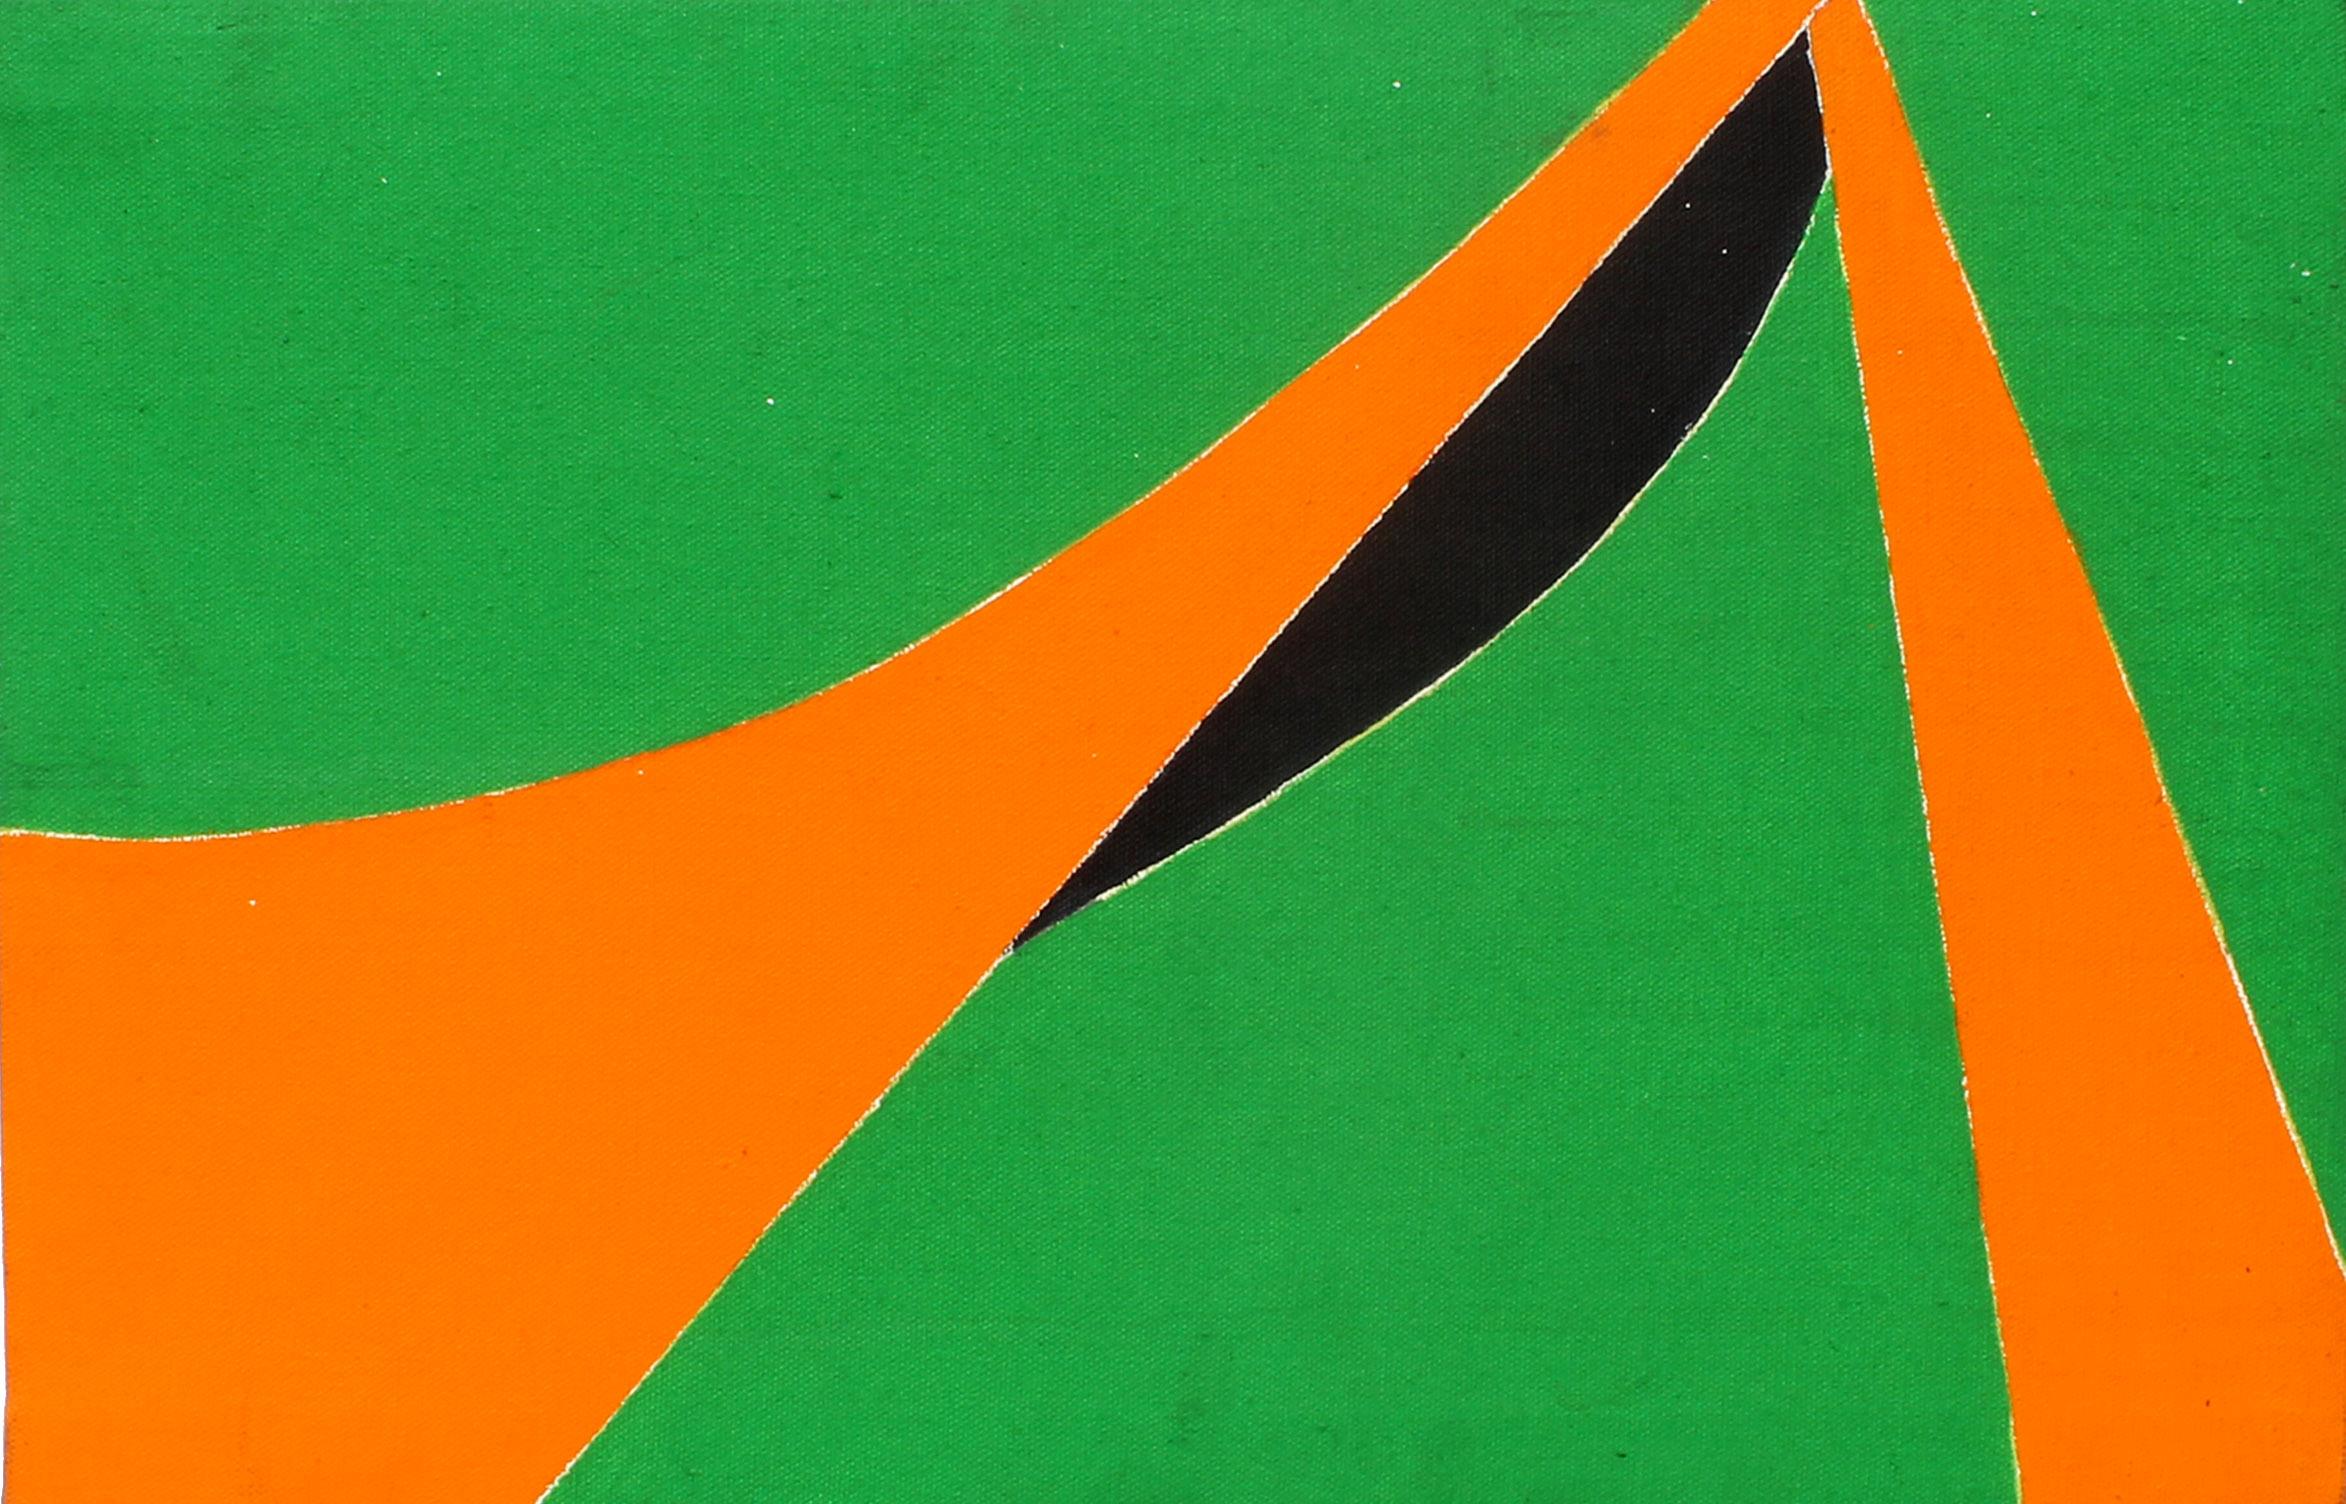 Martica Miguens Abstract Painting - Minimalist Painting New York American Artist Female Orange Green Black 1970